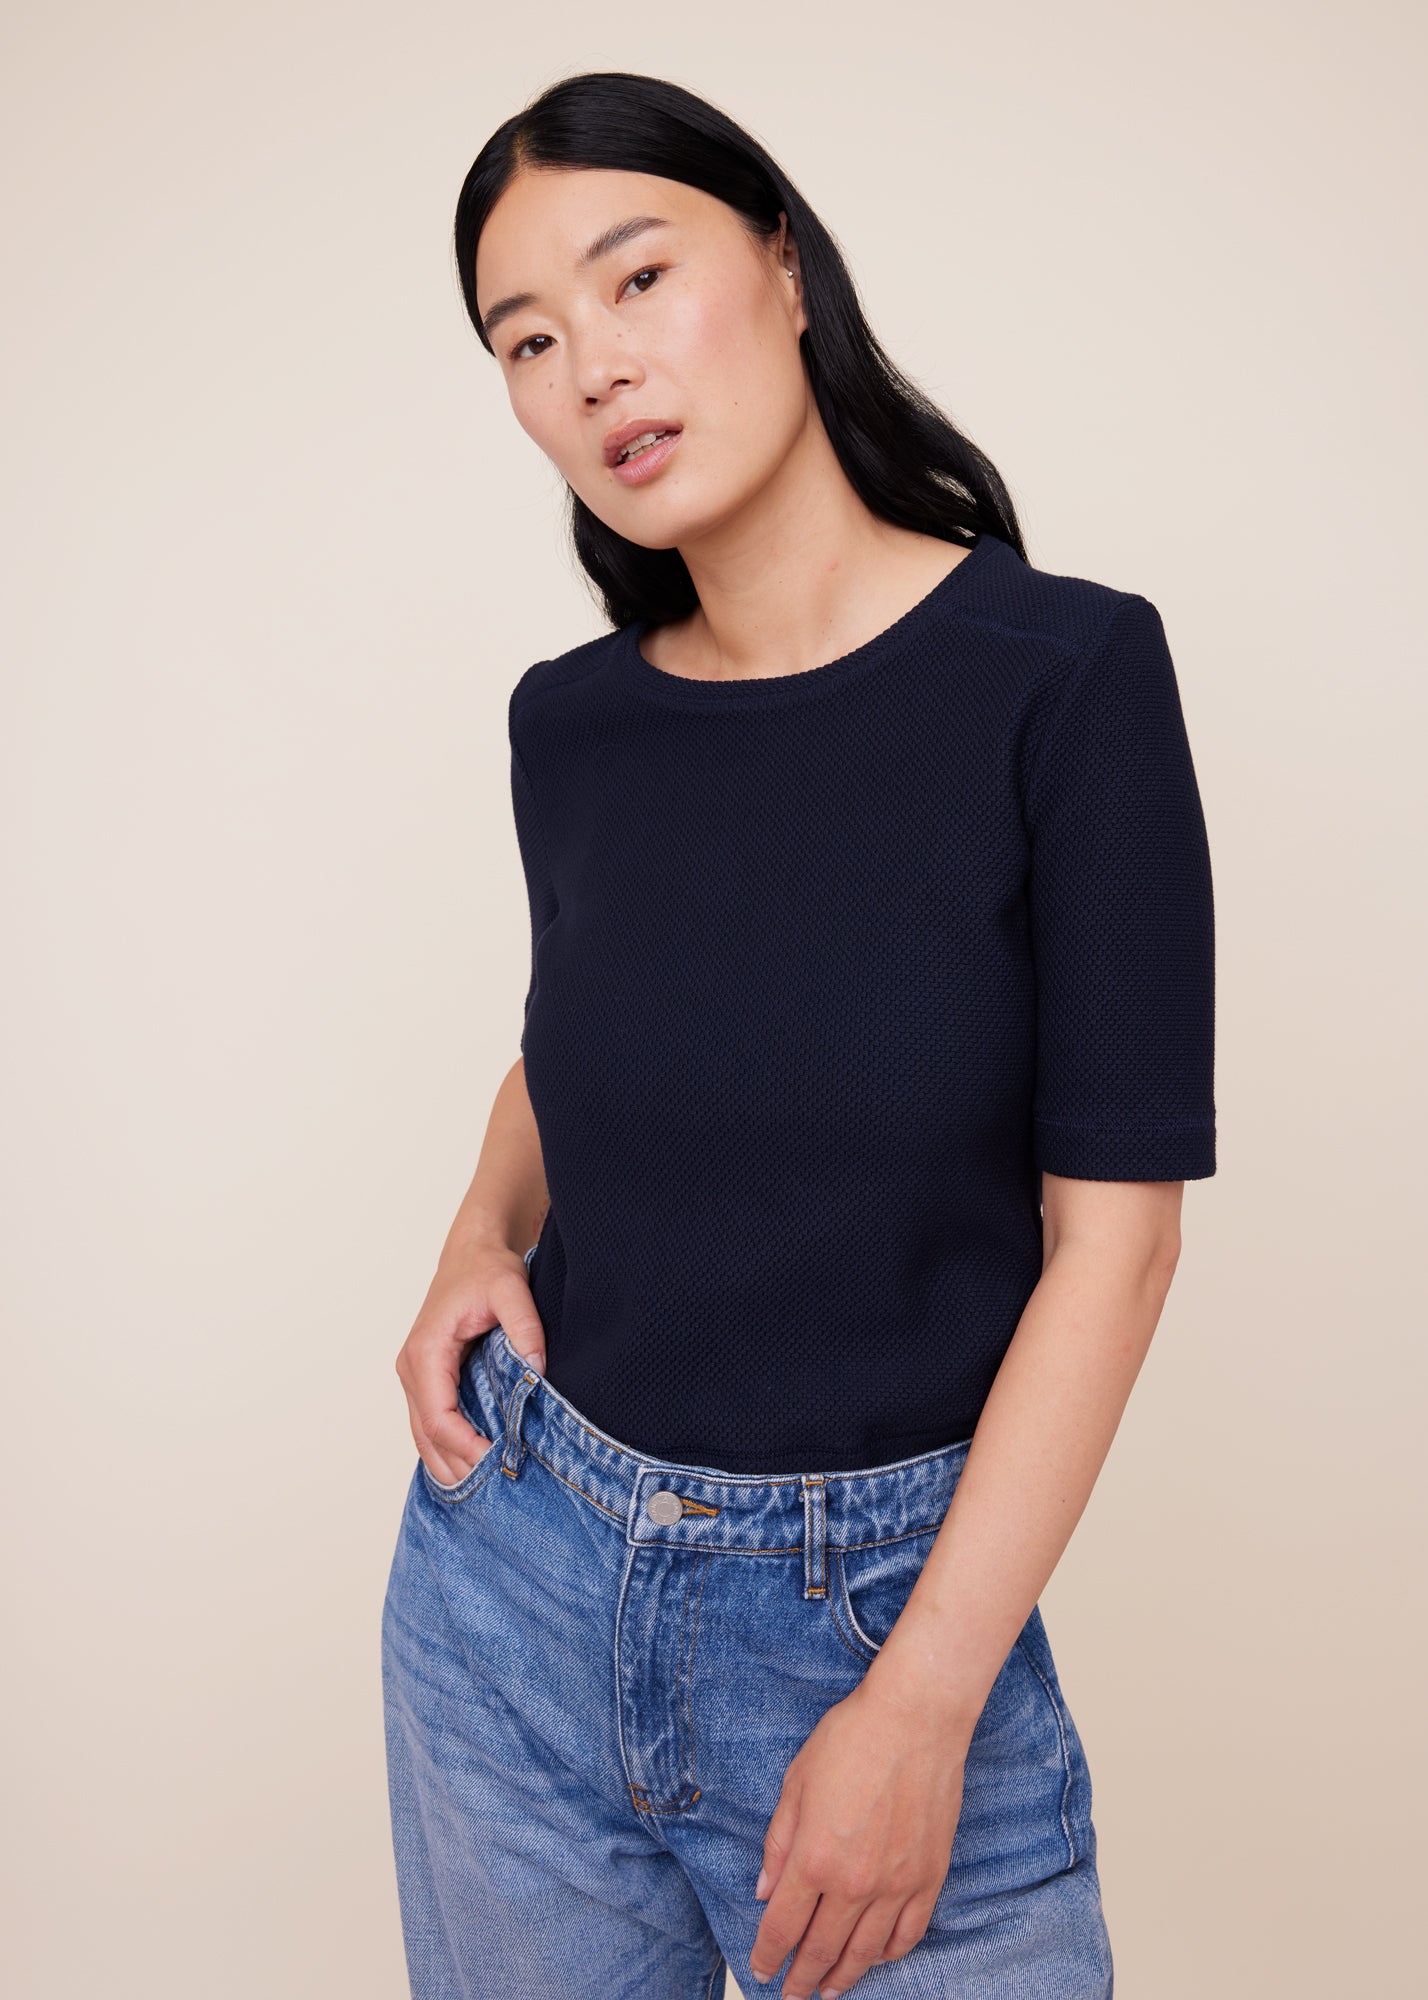 Structured top with short sleeves